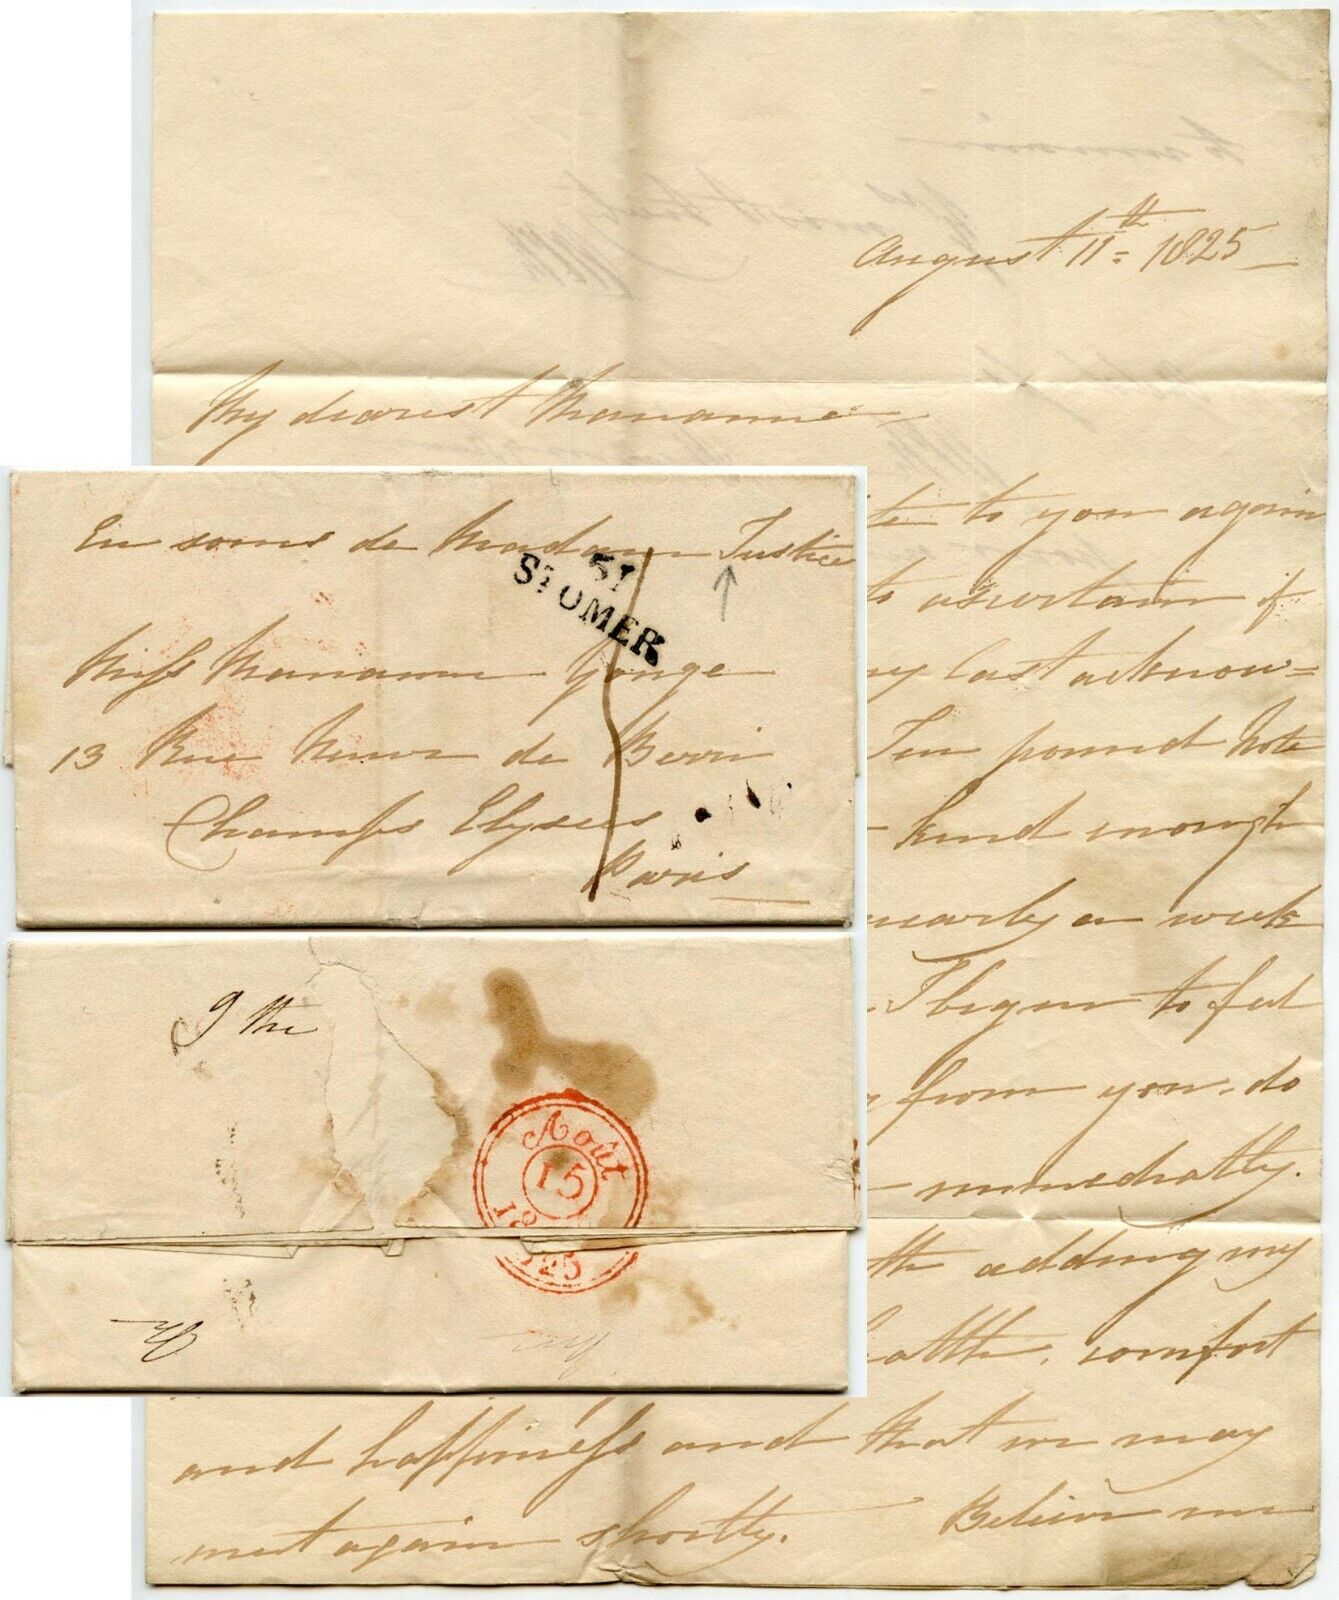 FRANCE 1825 LETTER in ENGLISH to MISS MARIANNE YONGE in PARIS ...ST OMER MILEAGE